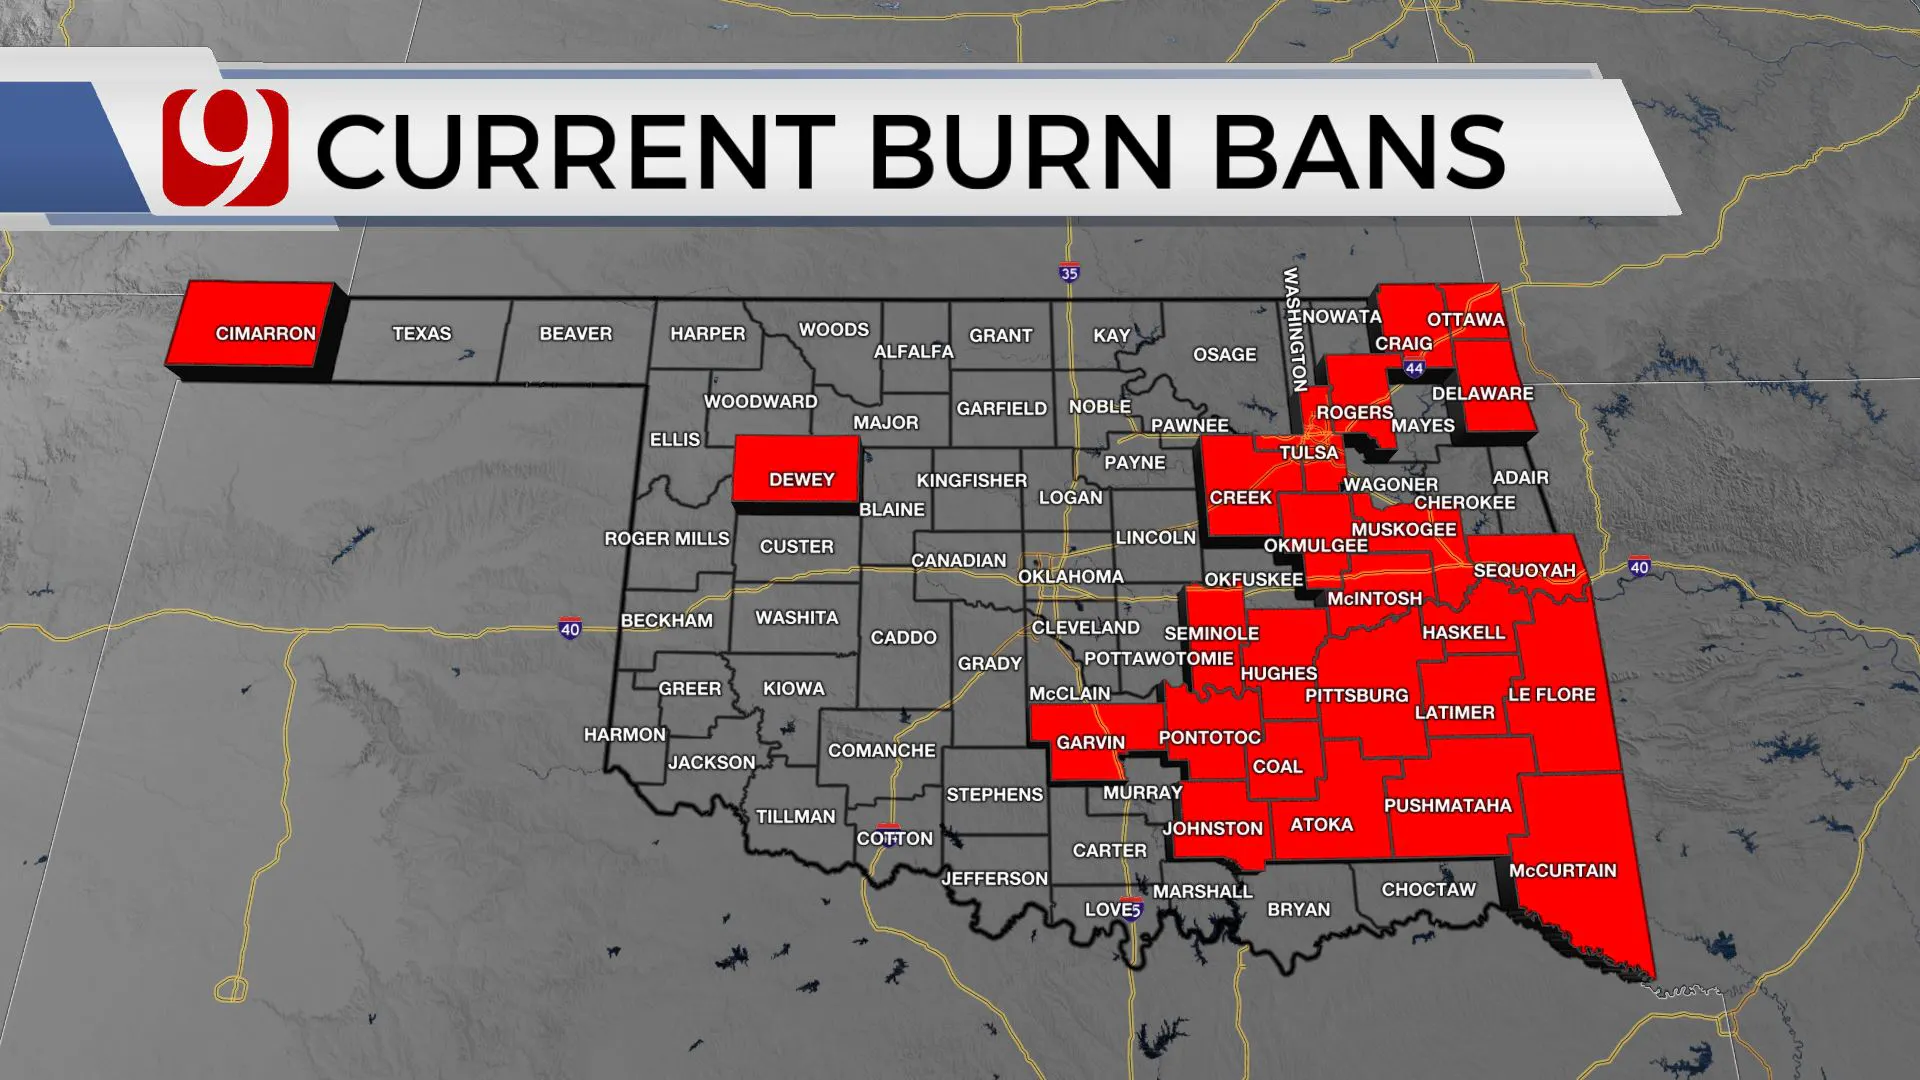 Burn bans currently across the state.